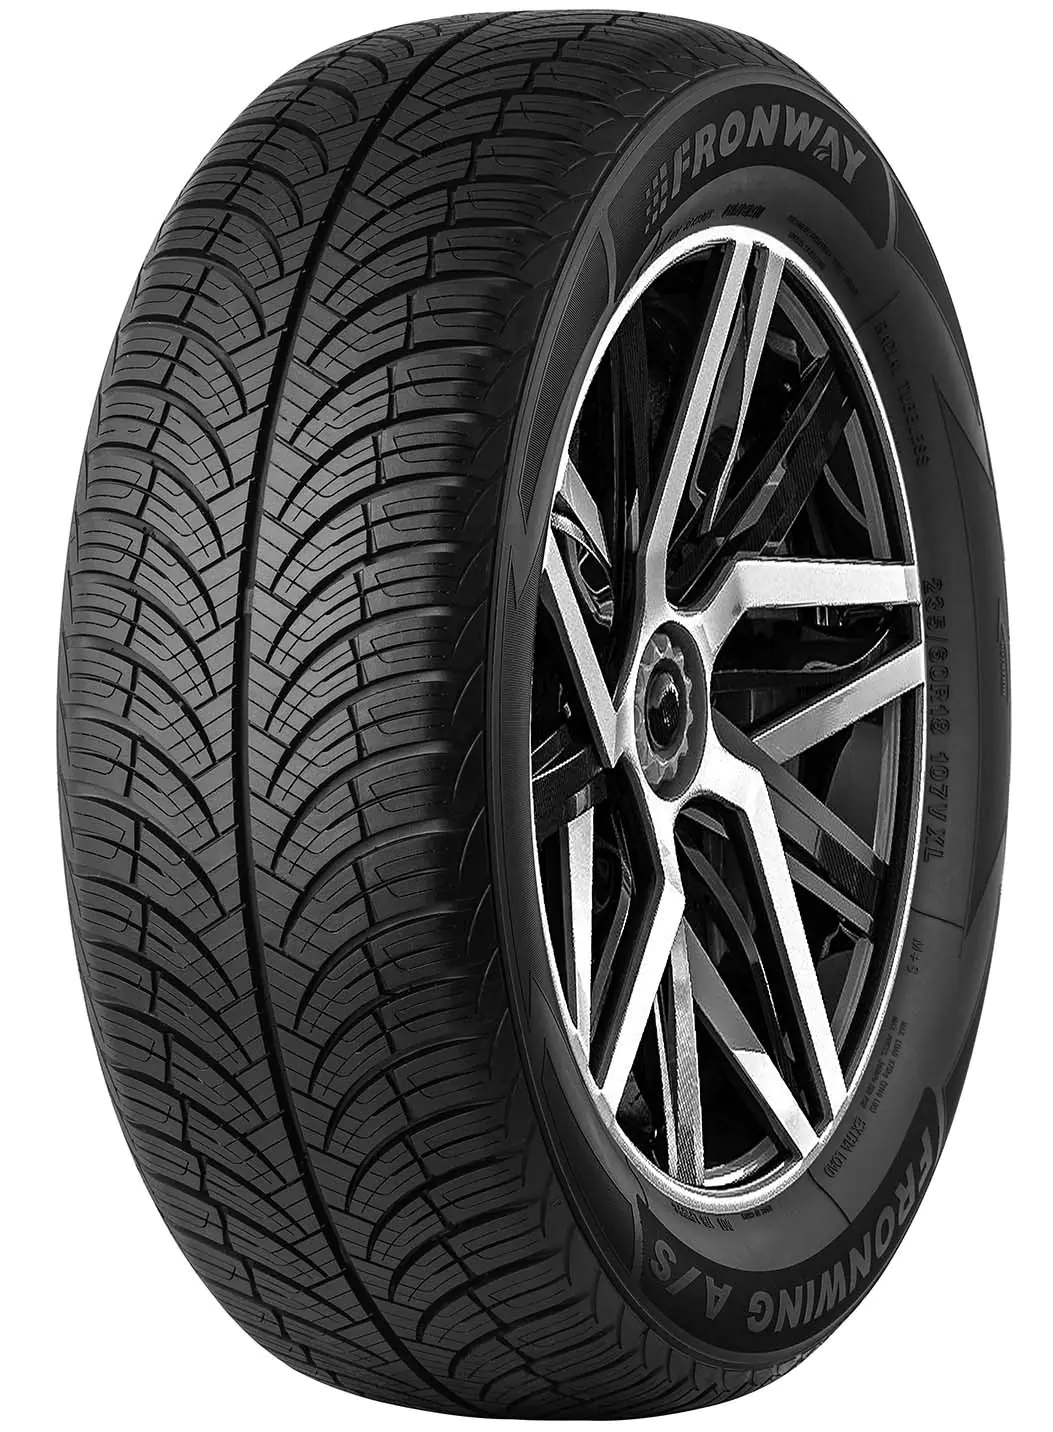 Fronway Fronway 165/65 R15 81T FRONWING A/S pneumatici nuovi All Season 